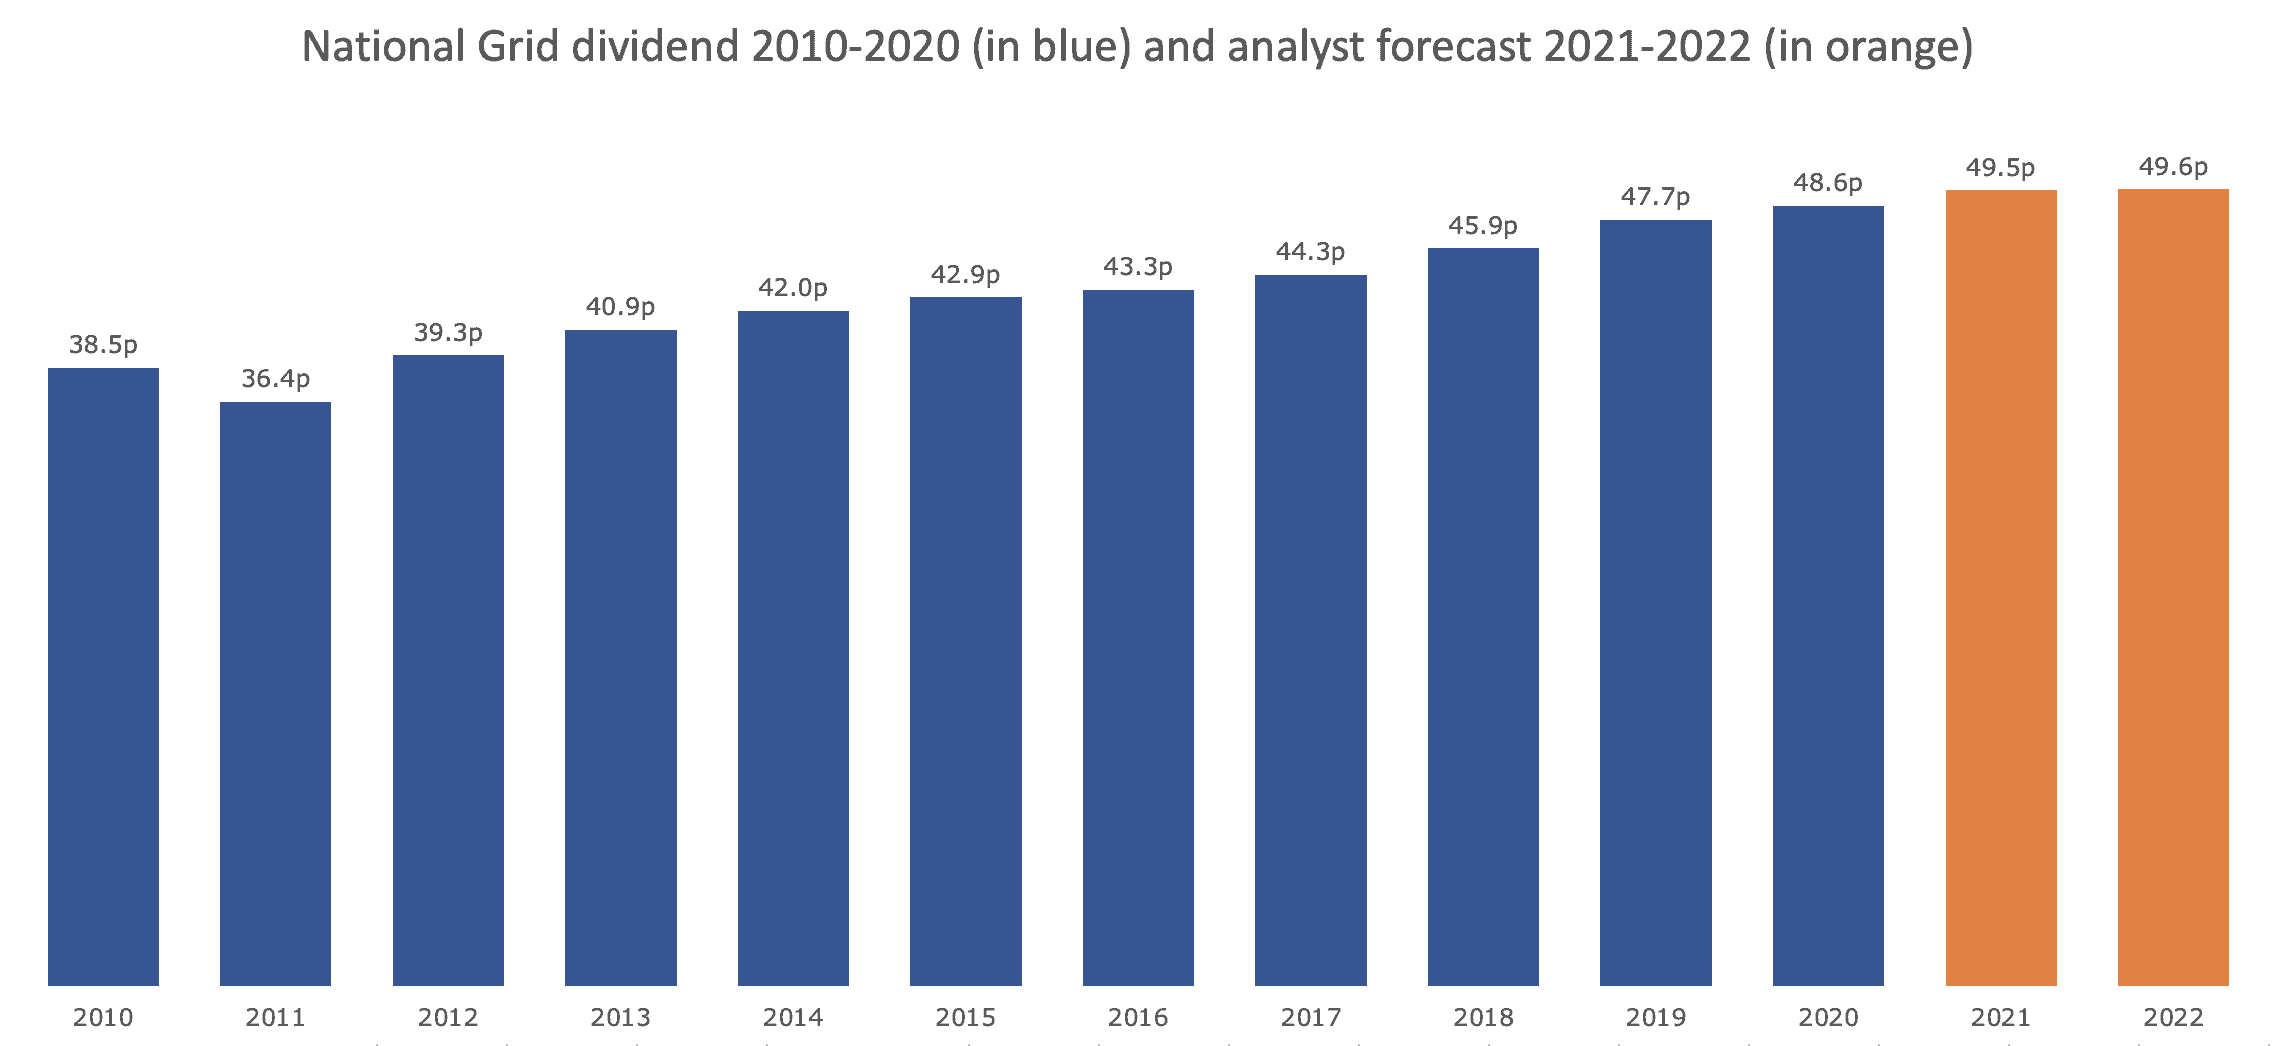 National grid dividend from 2010 to 2020 and estimates for 2021 to 2022